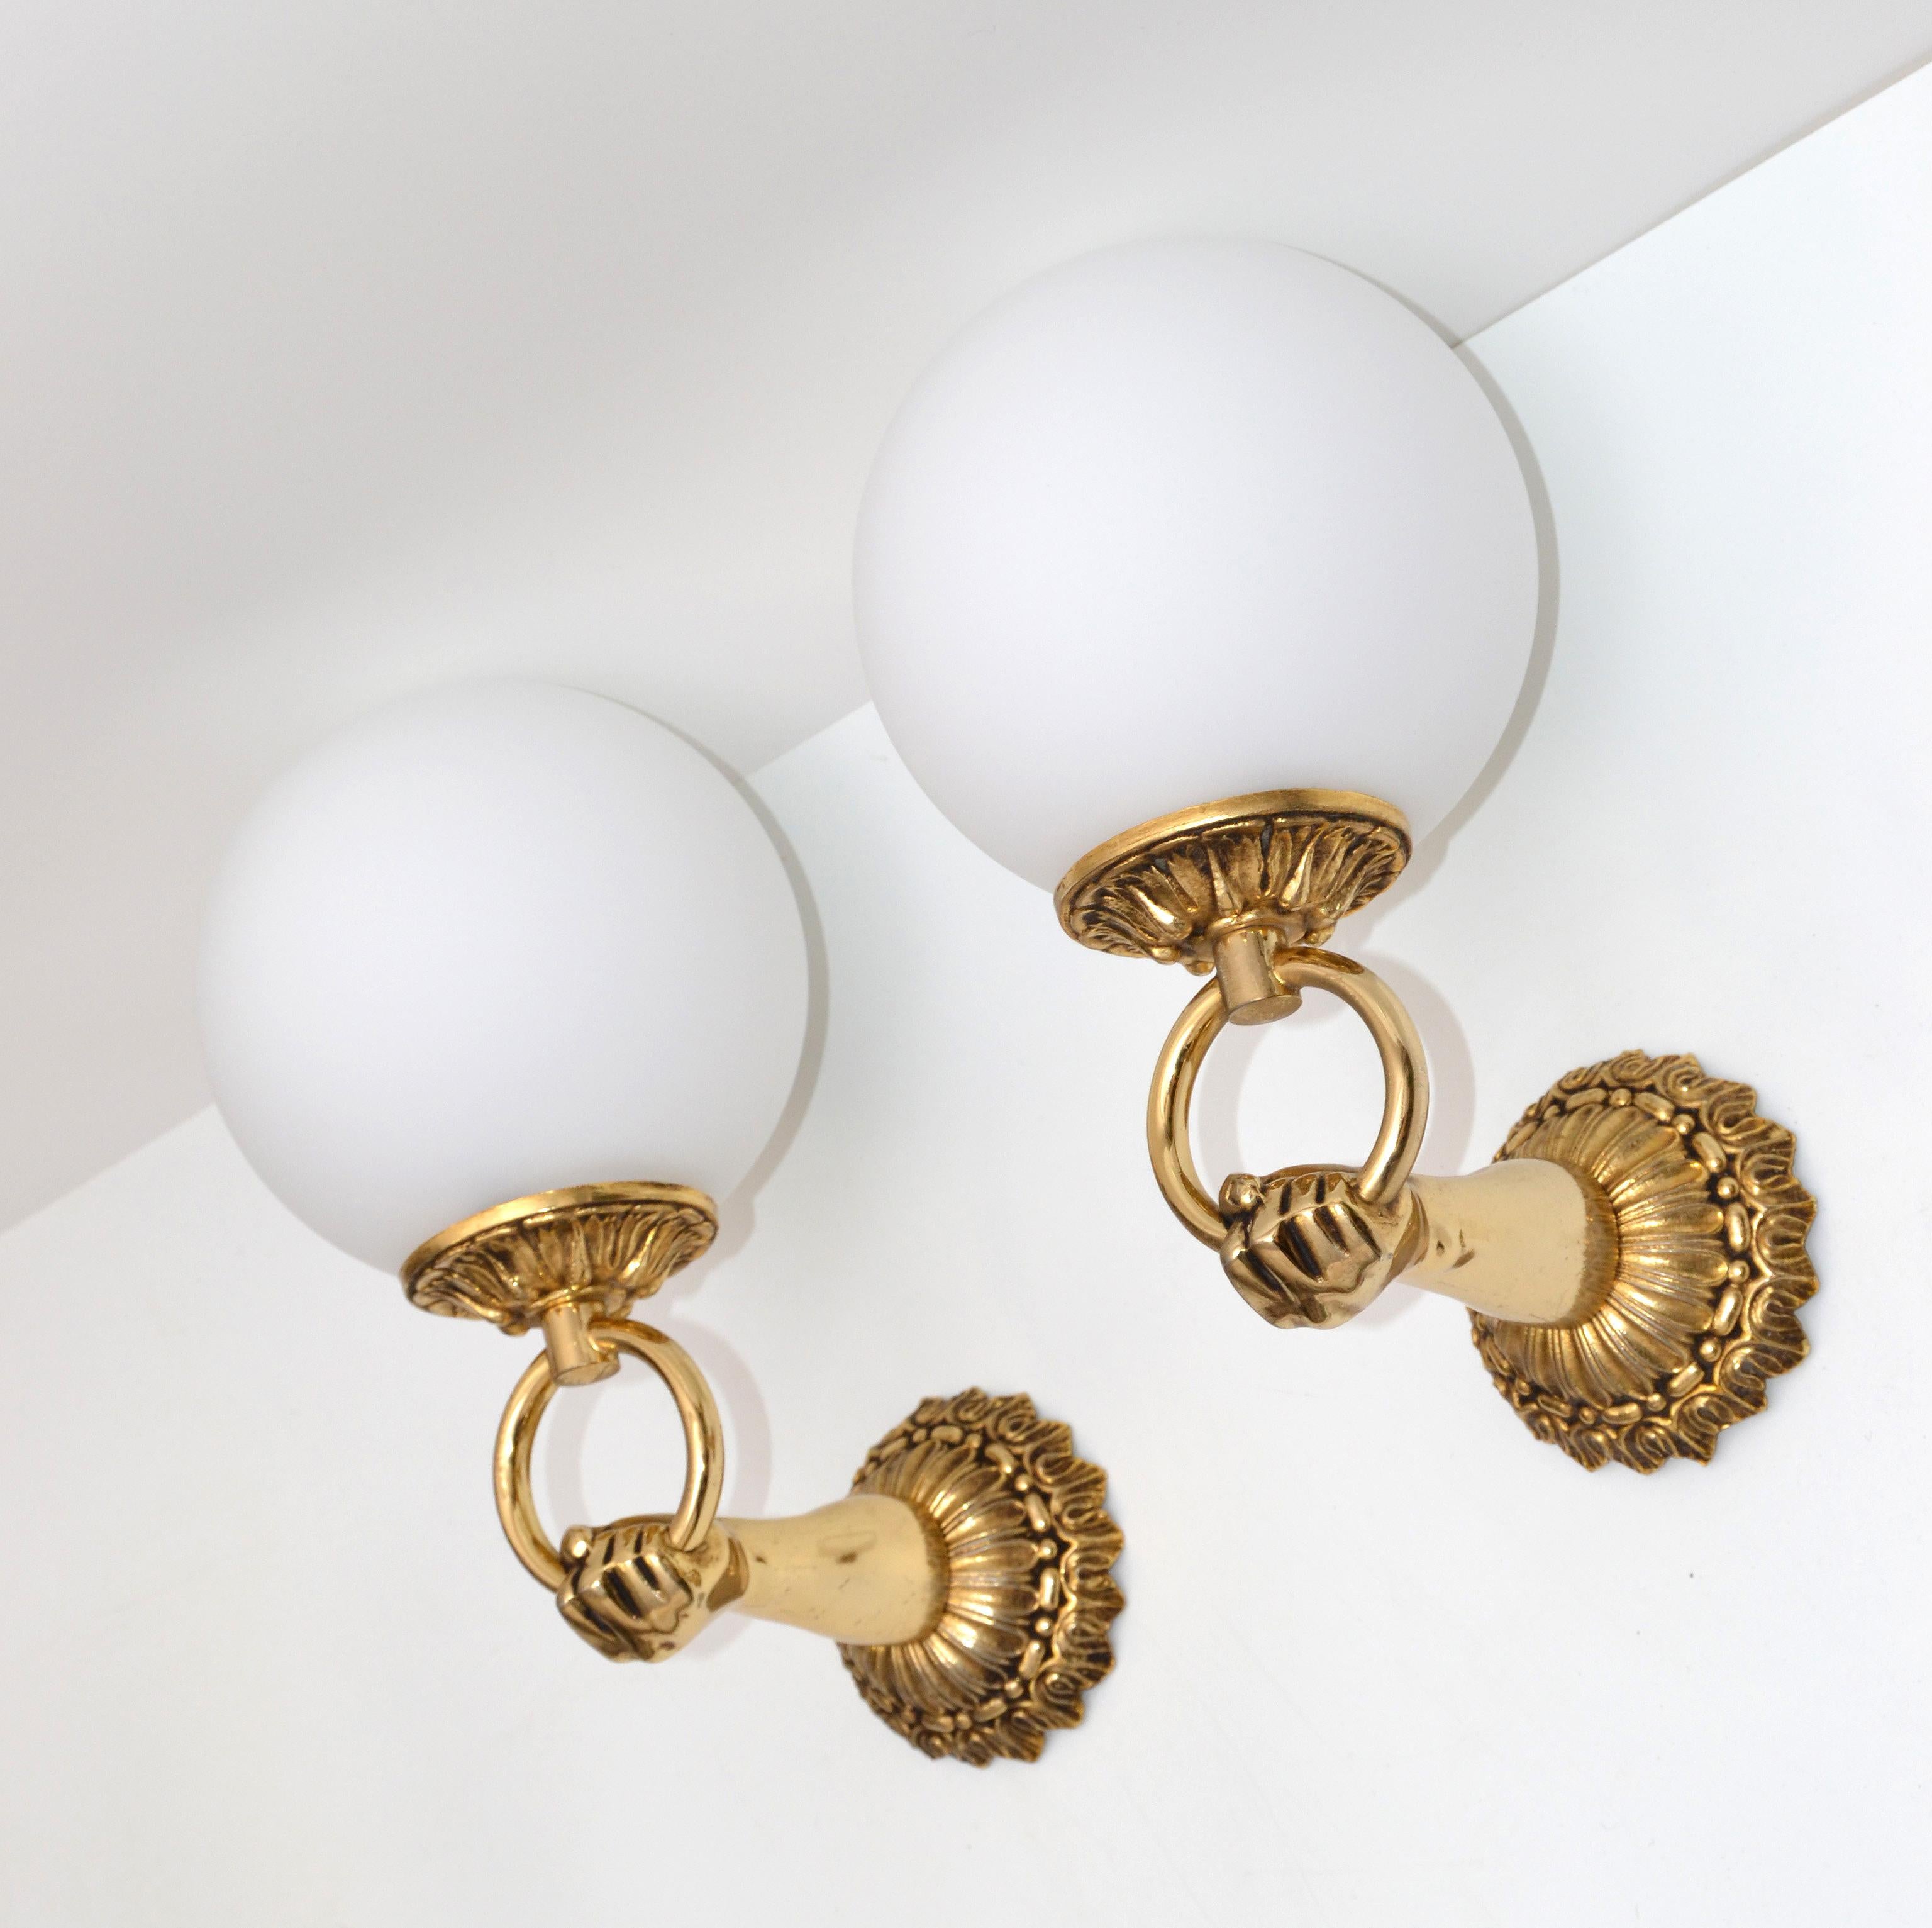 1960s French Neoclassical Hand Brass and Opaline Glass Sconces, 3 Pair Available For Sale 5